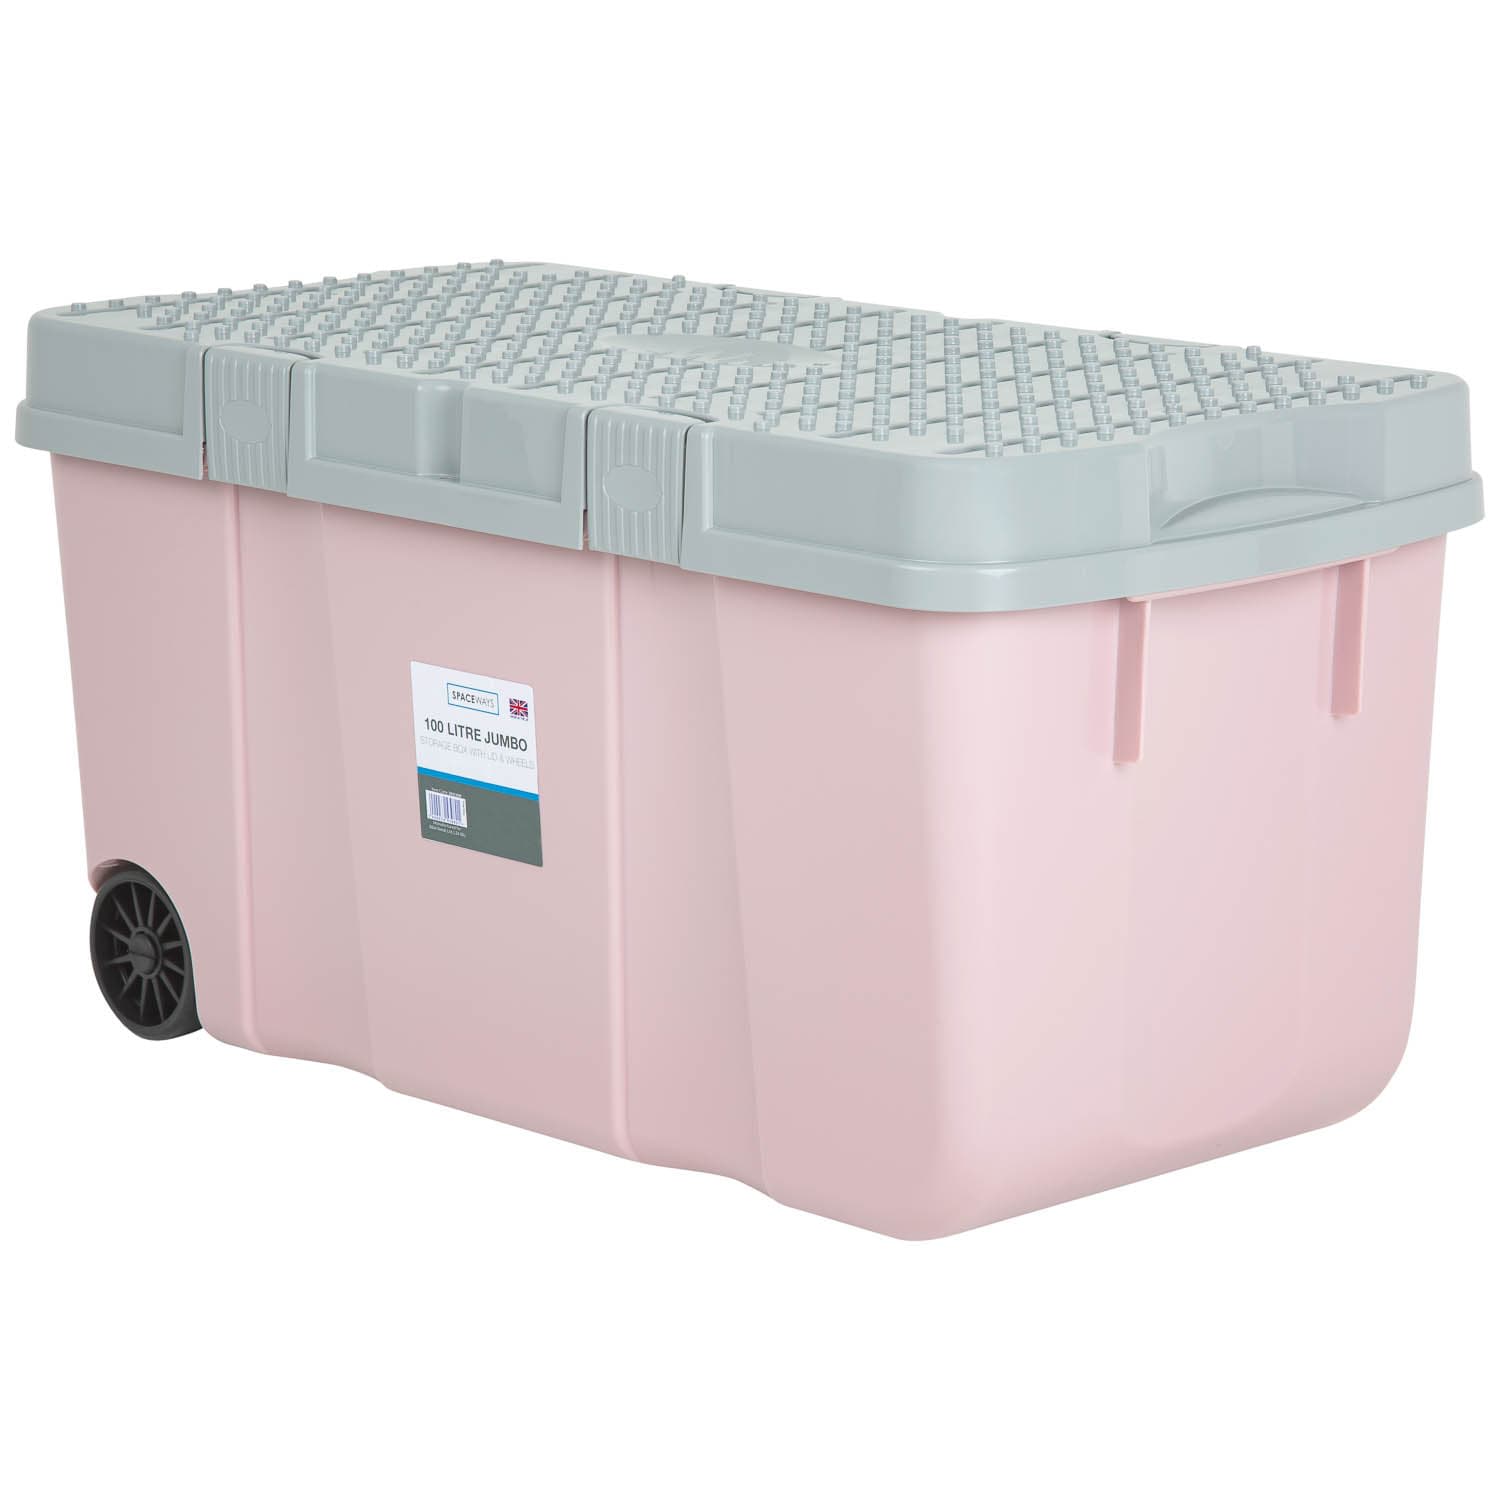 Deluxe Storage Box 100L - Pink